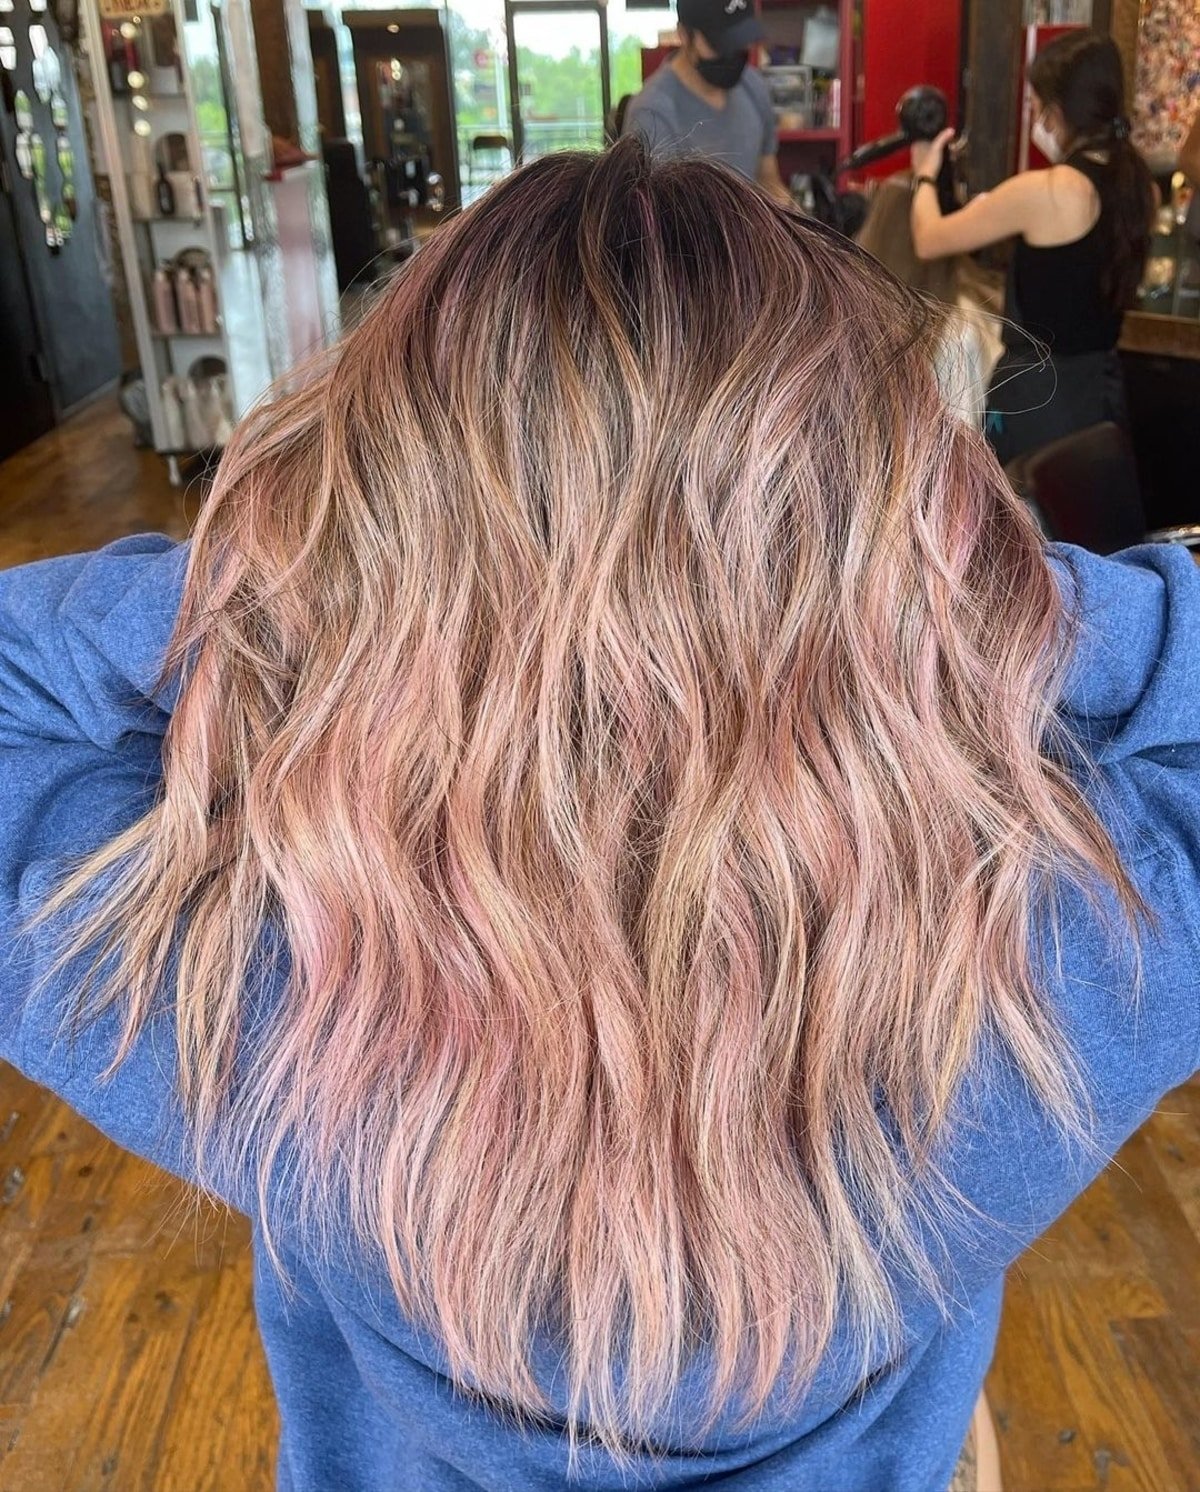 Rose gold hair with pink highlights